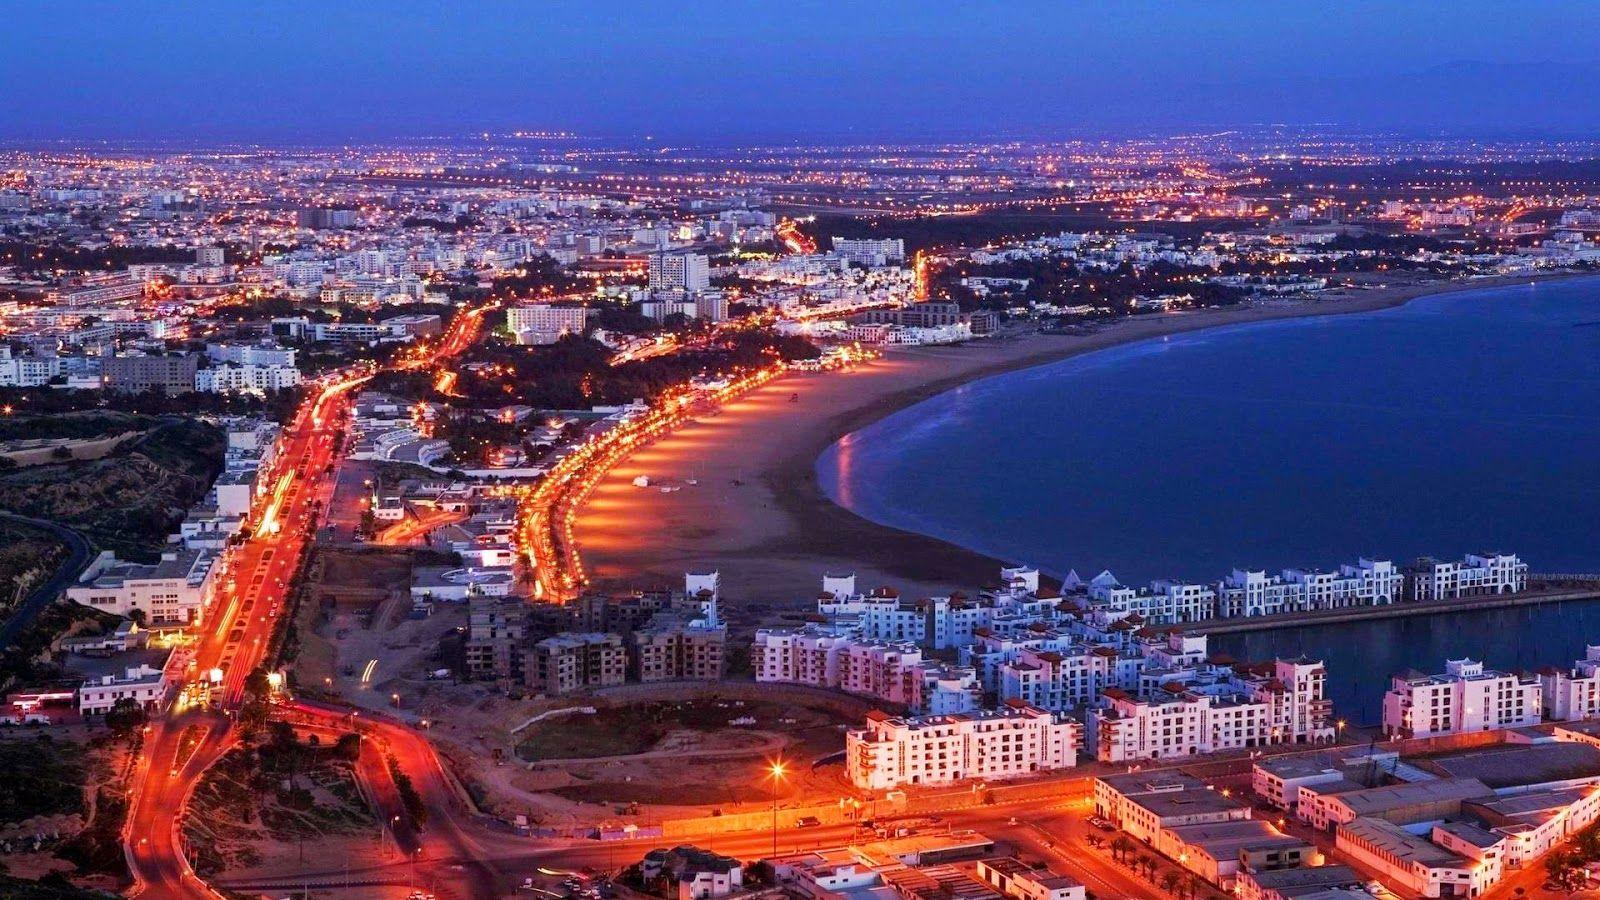 free wallpaper nature and hotel agadir morocco. TOP. HOTEL